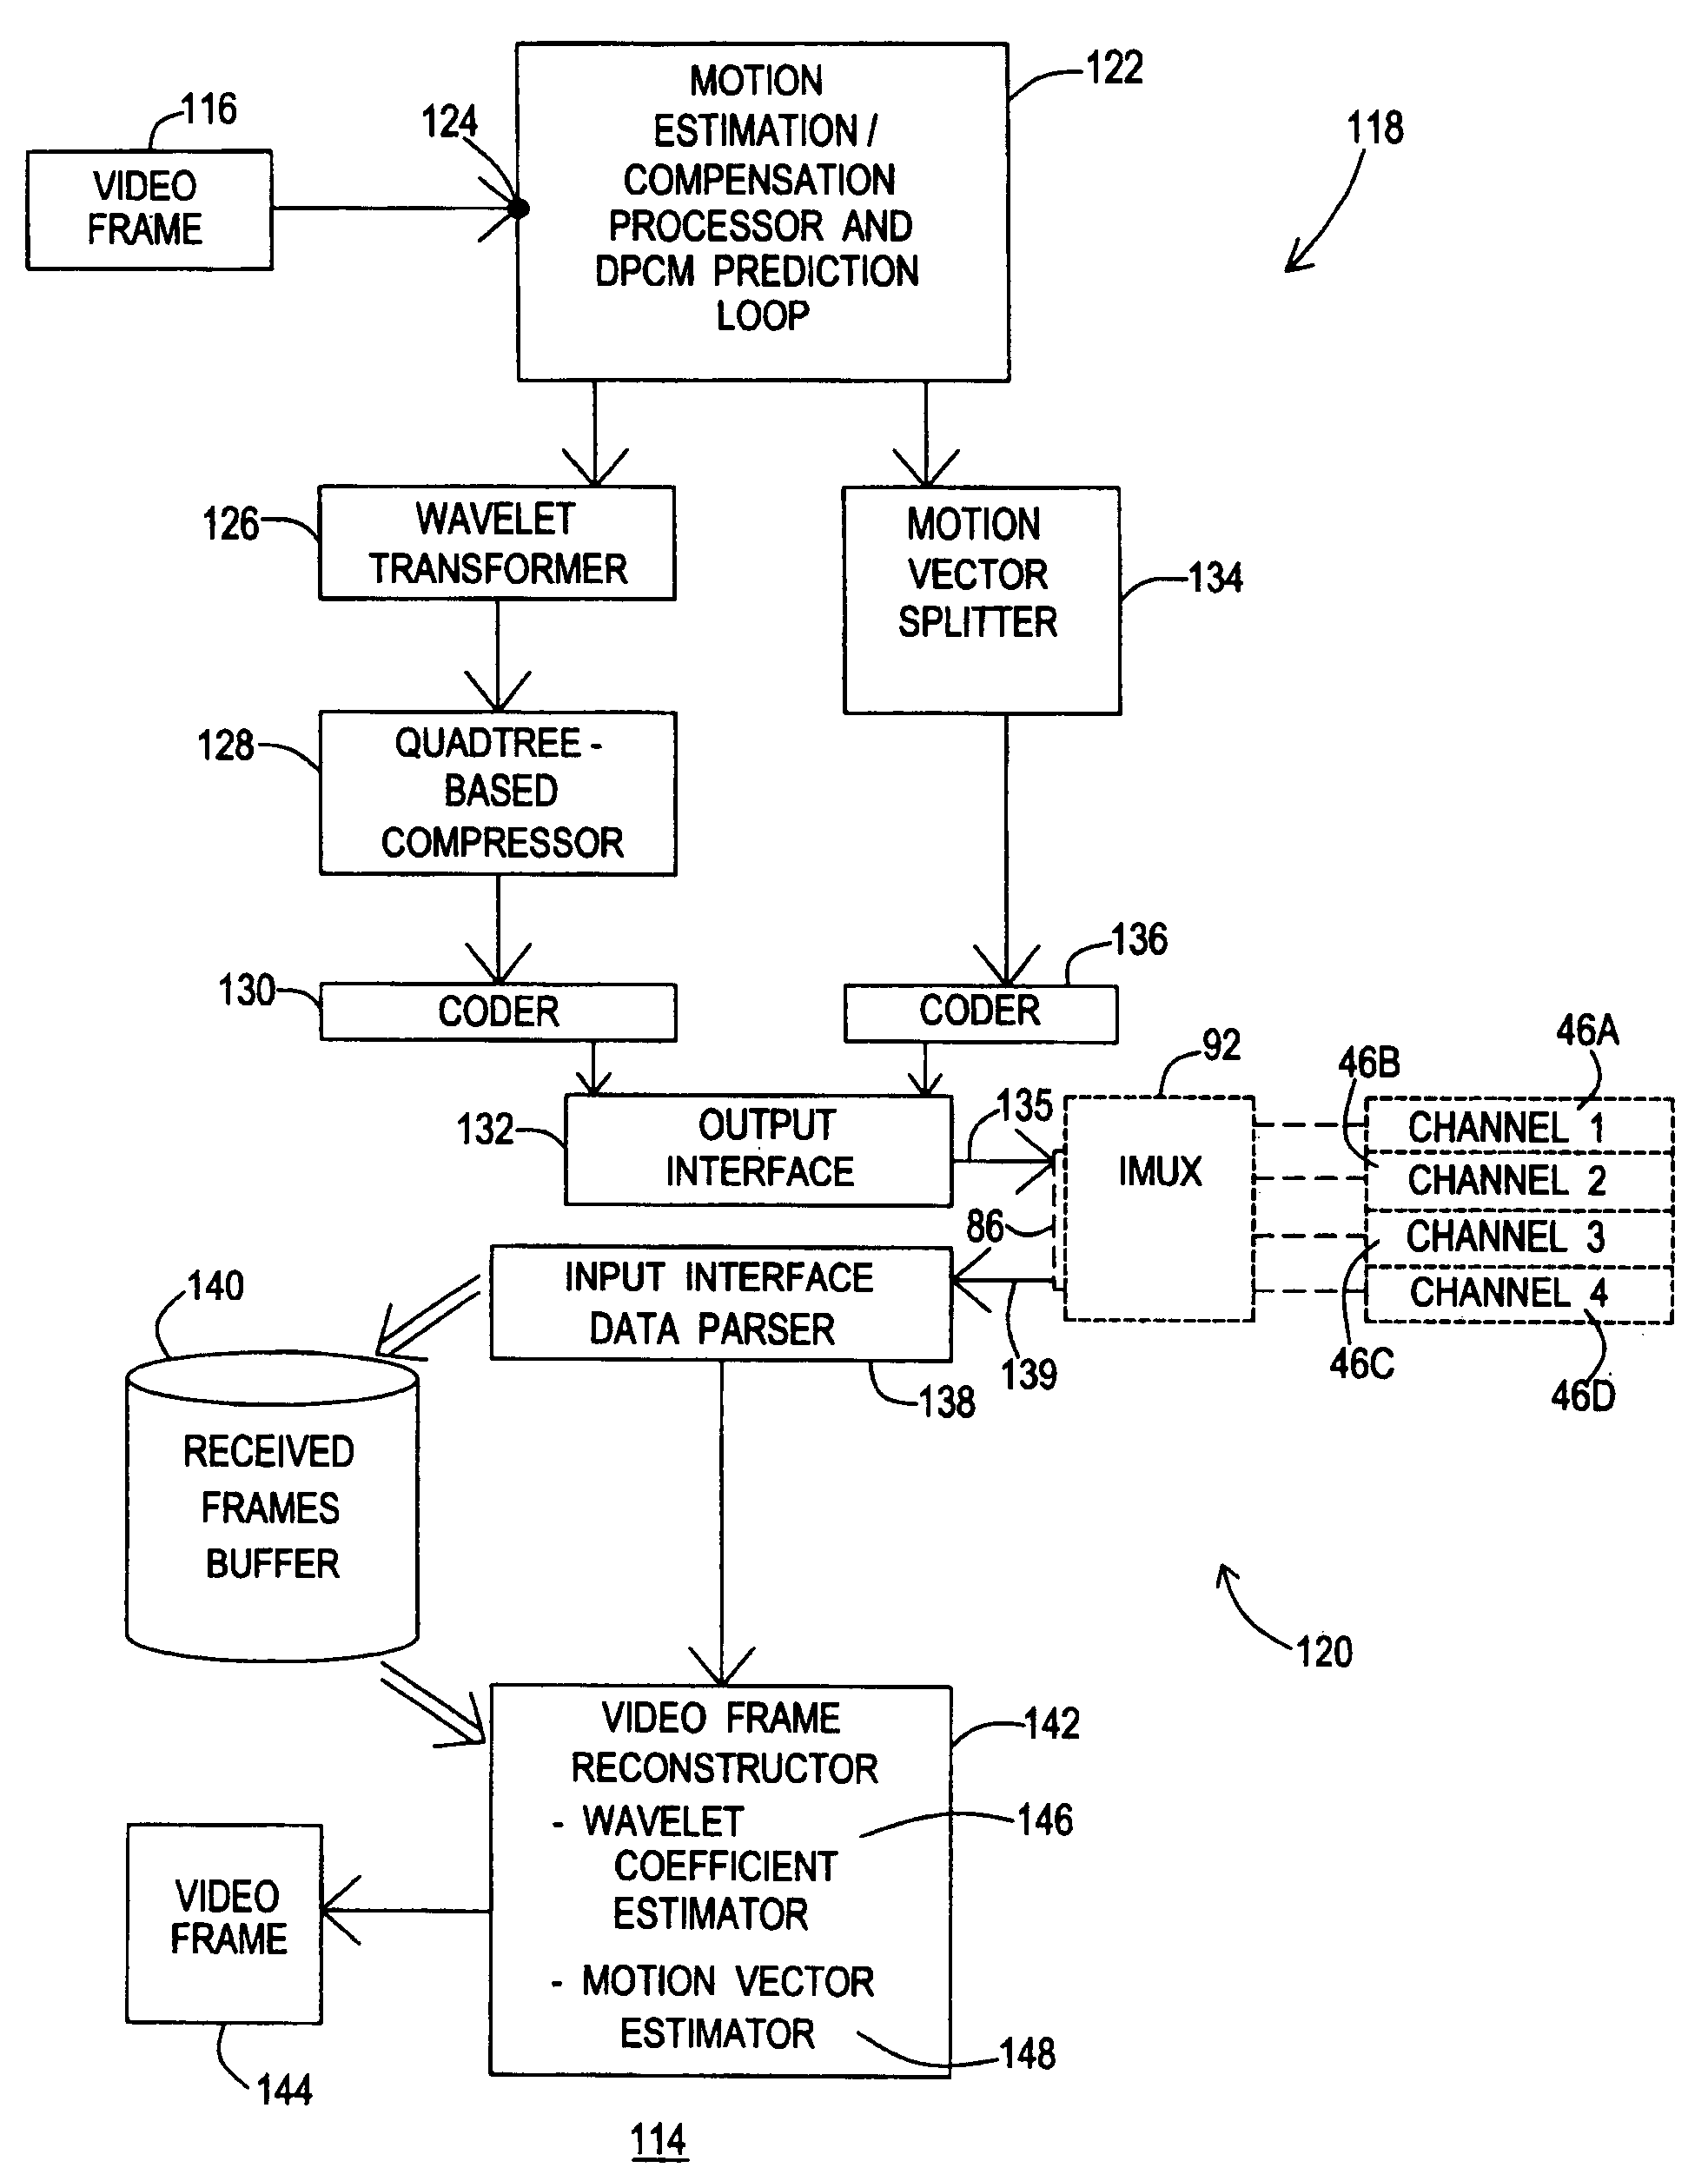 System and method for transmission of video signals using multiple channels